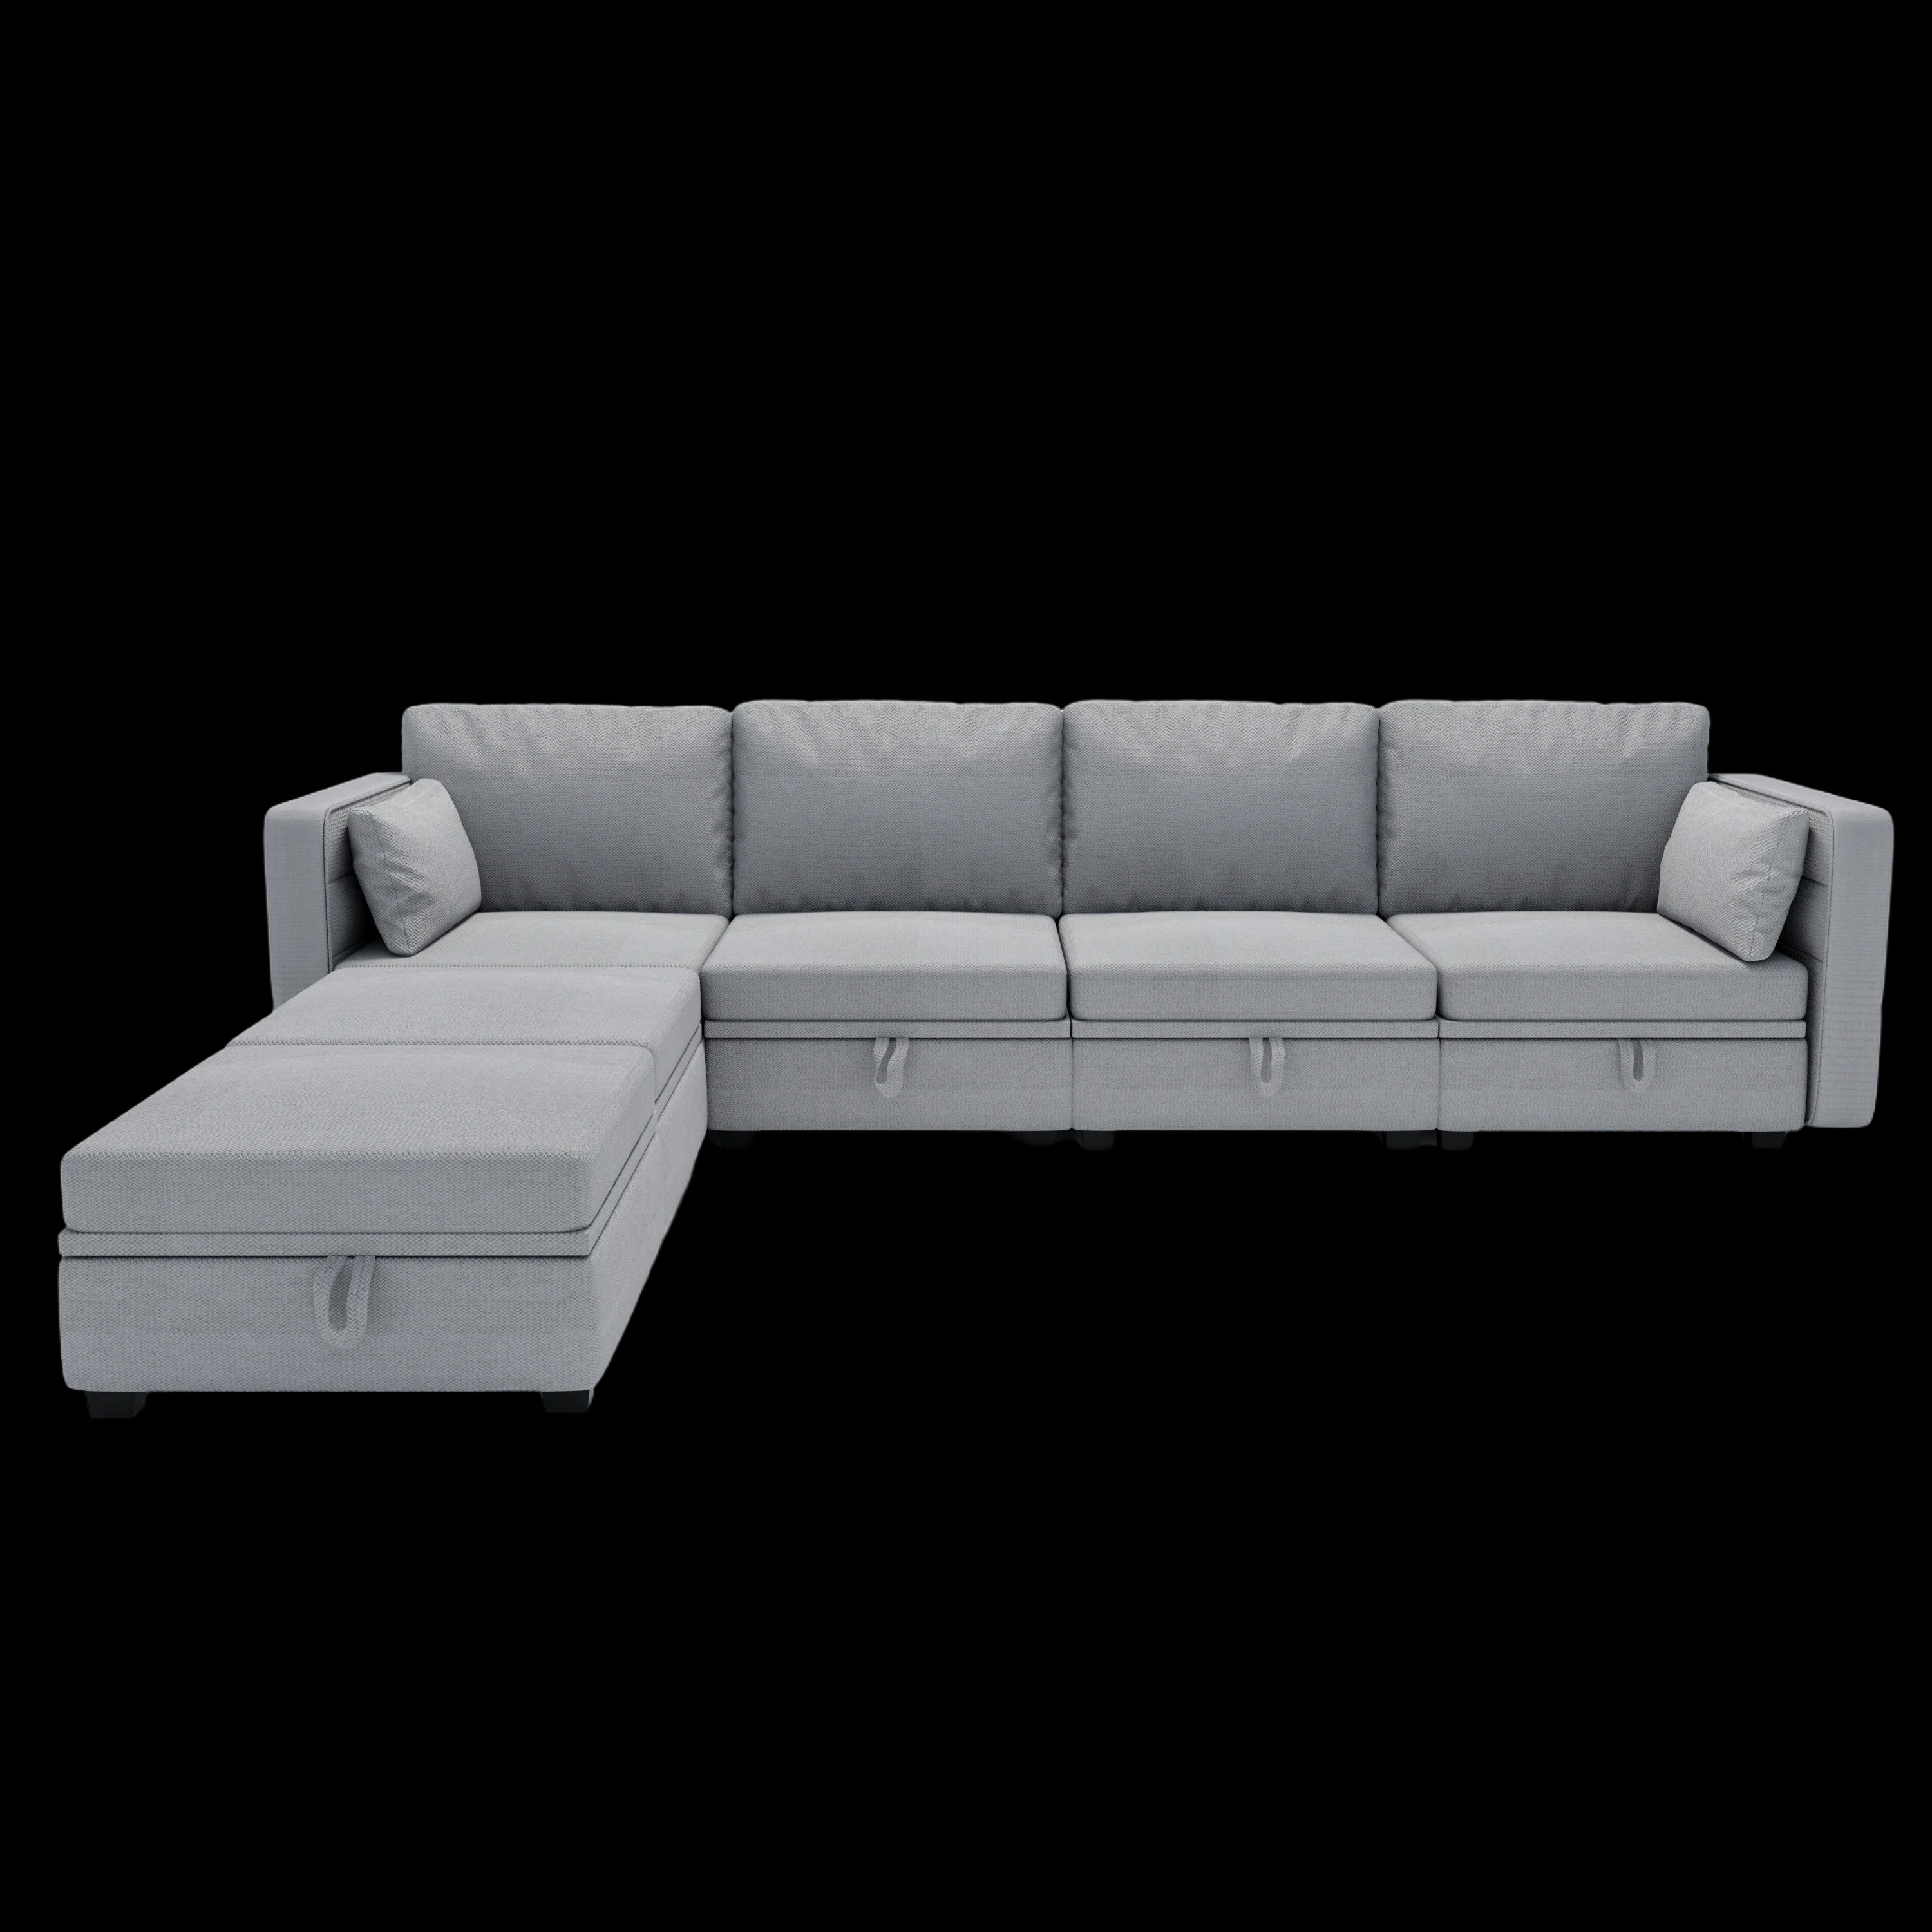 Sectional Sofa U Shaped Modular Couch with Reversible Chaise Modular Sofa